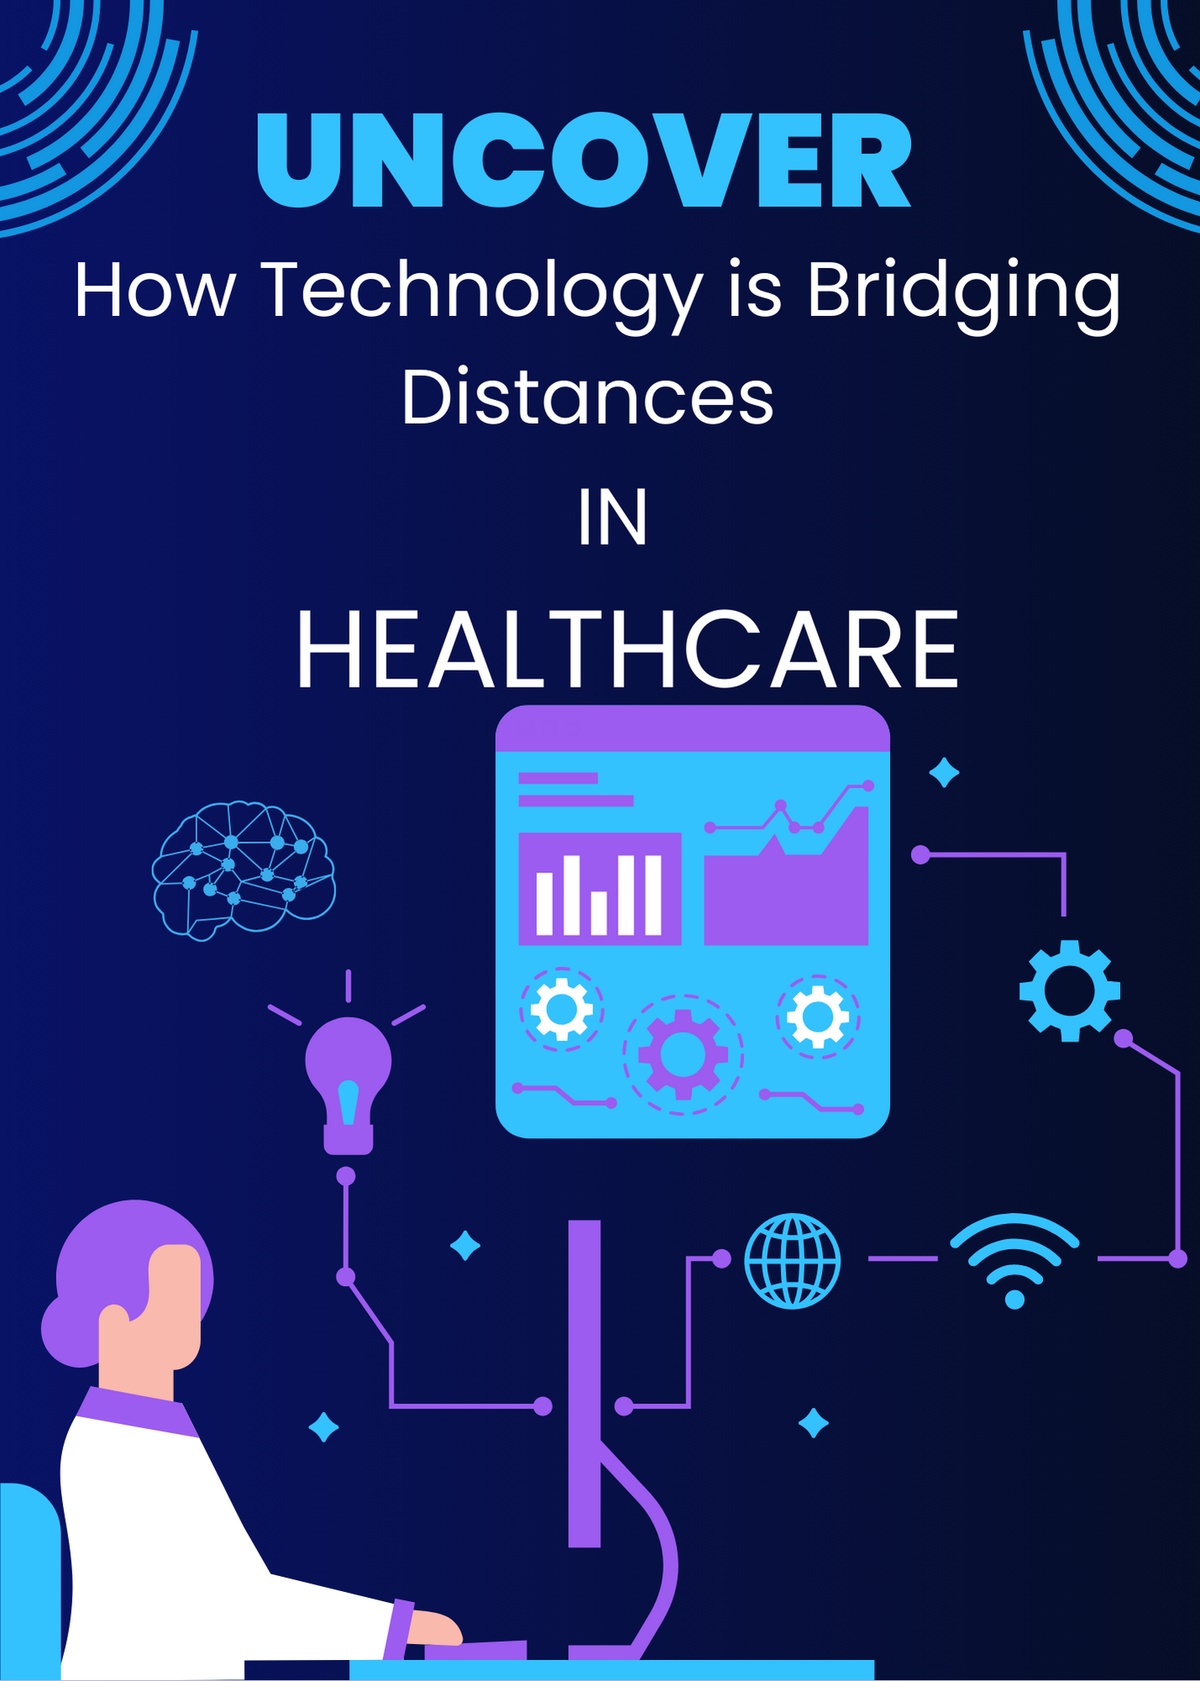 Uncover How Technology is Bridging Distances in Healthcare